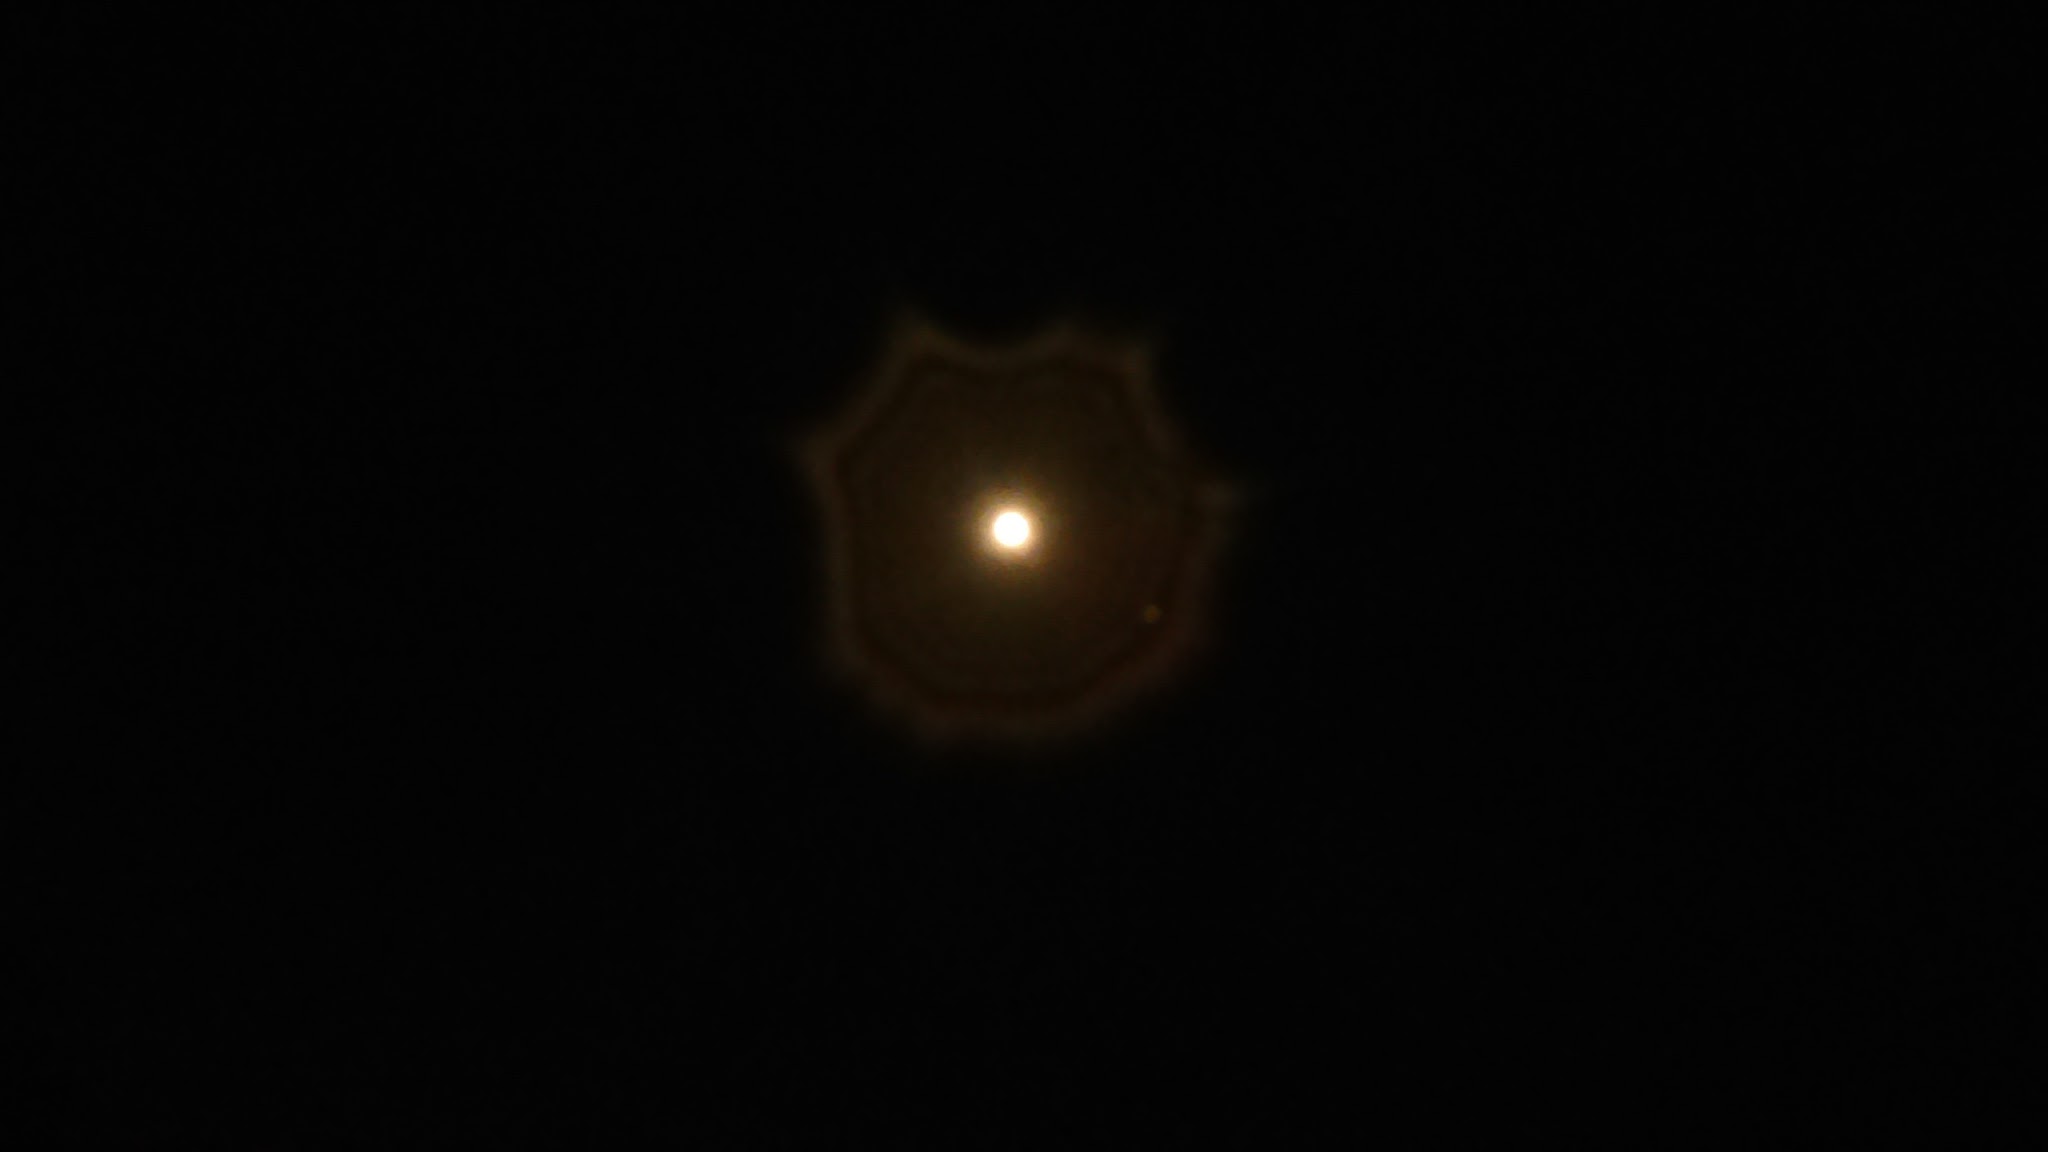 One of multiple Photos of this thing around the moon